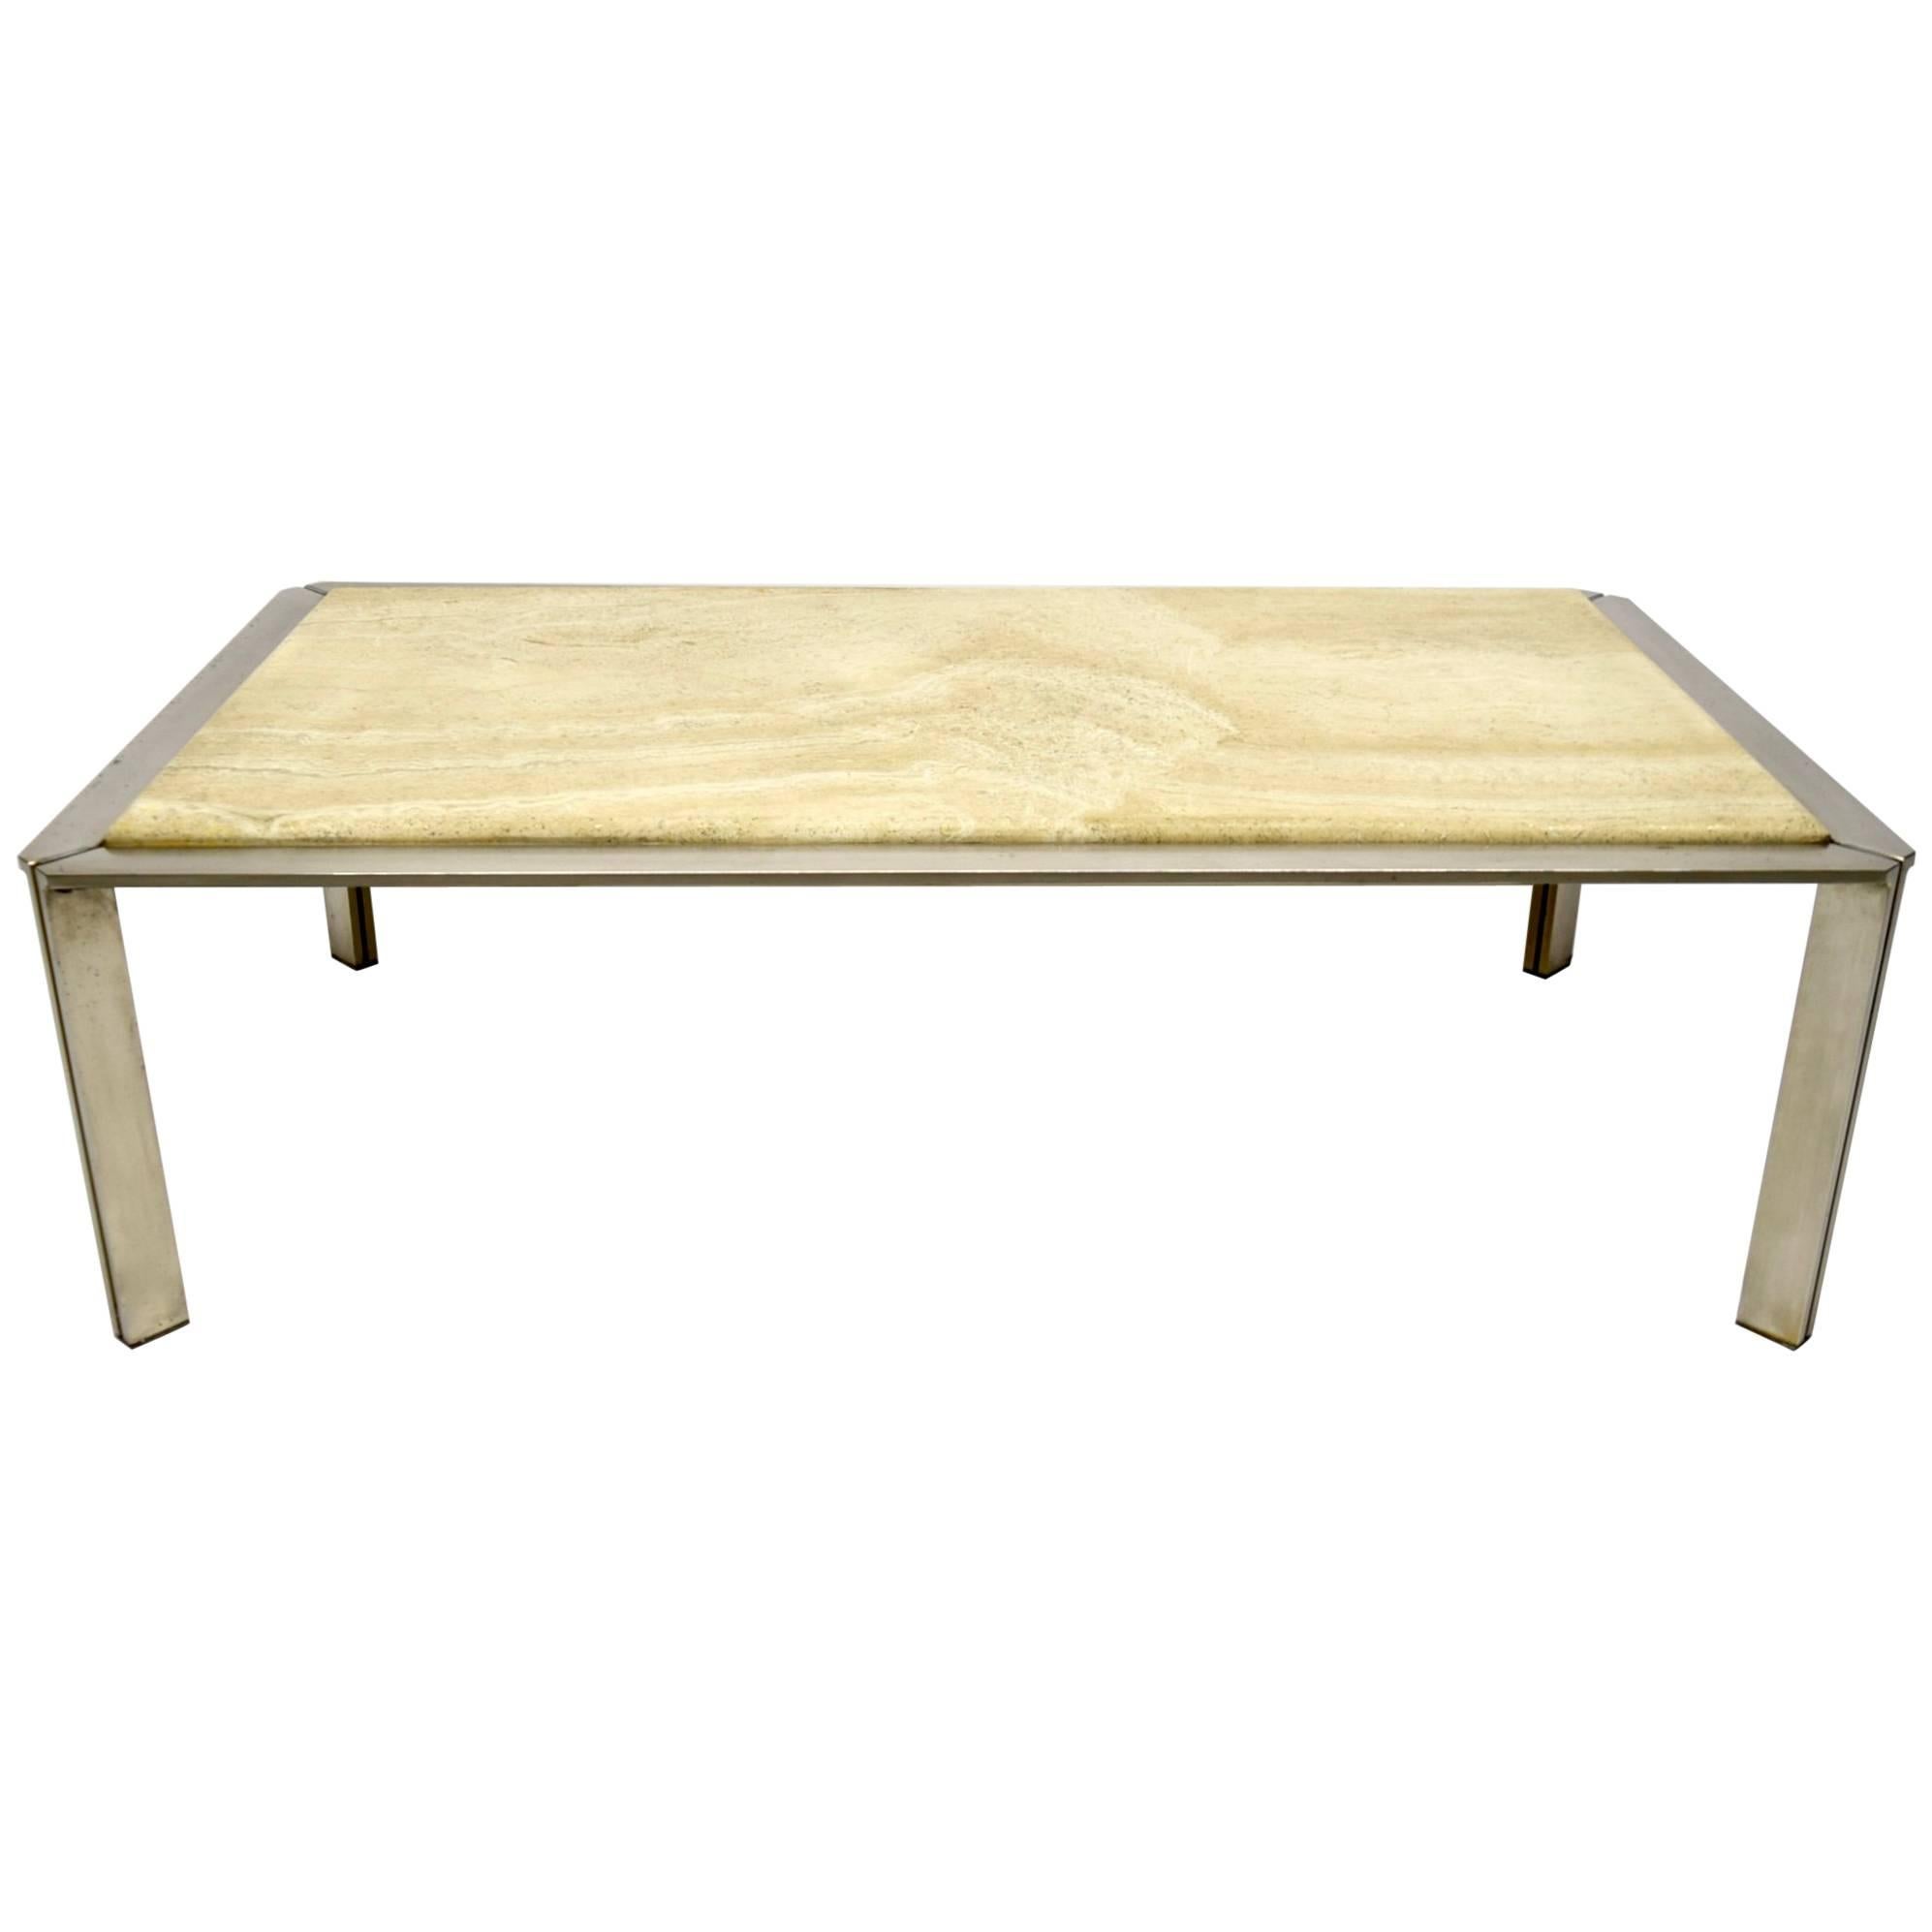 Steel Coffee Table with a Travertine Top circa 1970, made in France